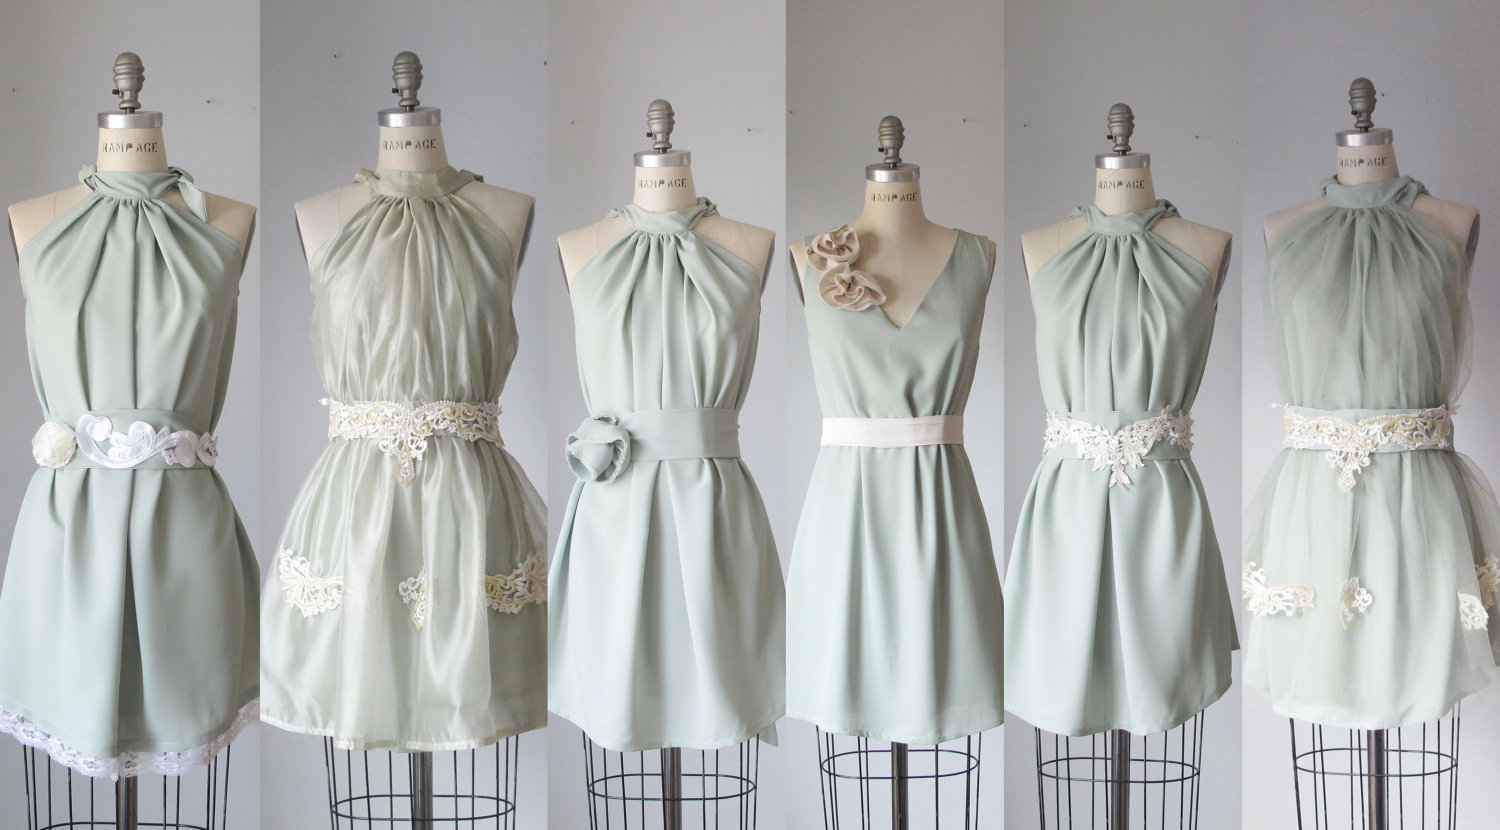 Mismatched Bridesmaids Dresses from Etsy - same colour different styles